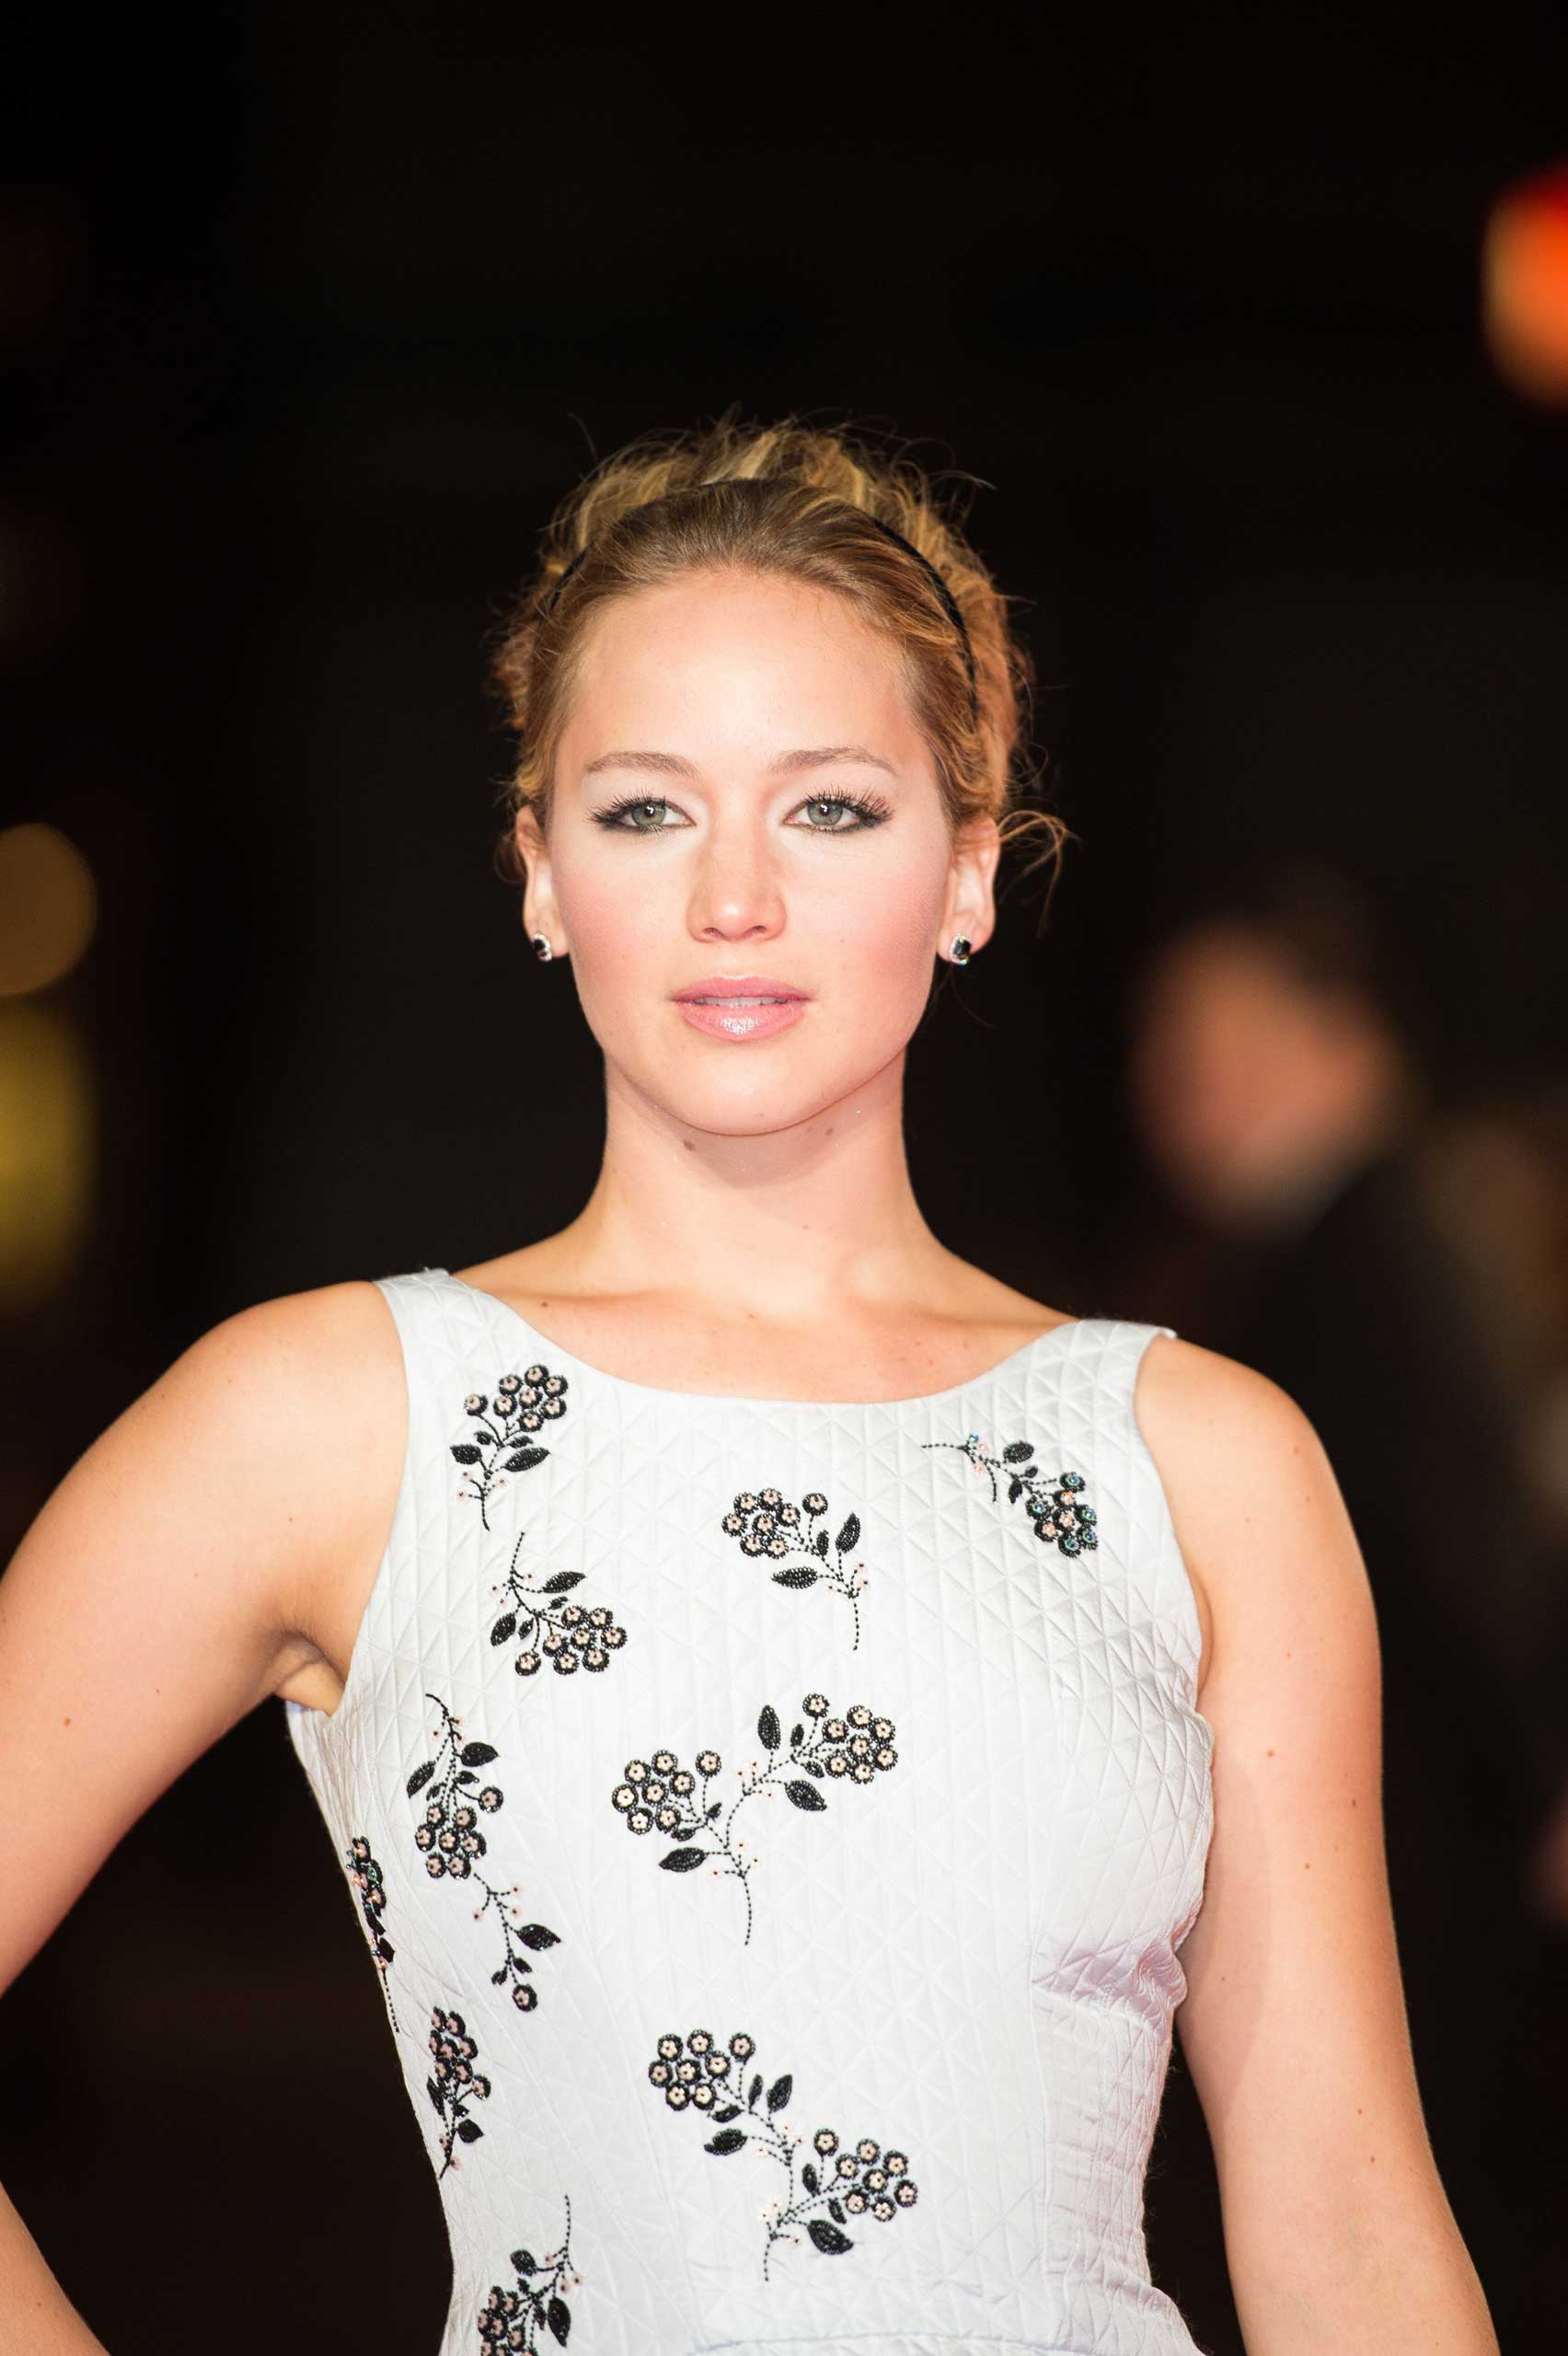 Jennifer Lawrence at the Hunger Games Premiere at Leicester Square in London on Nov. 10, 2014. (Caron Westbrook—Corbis)